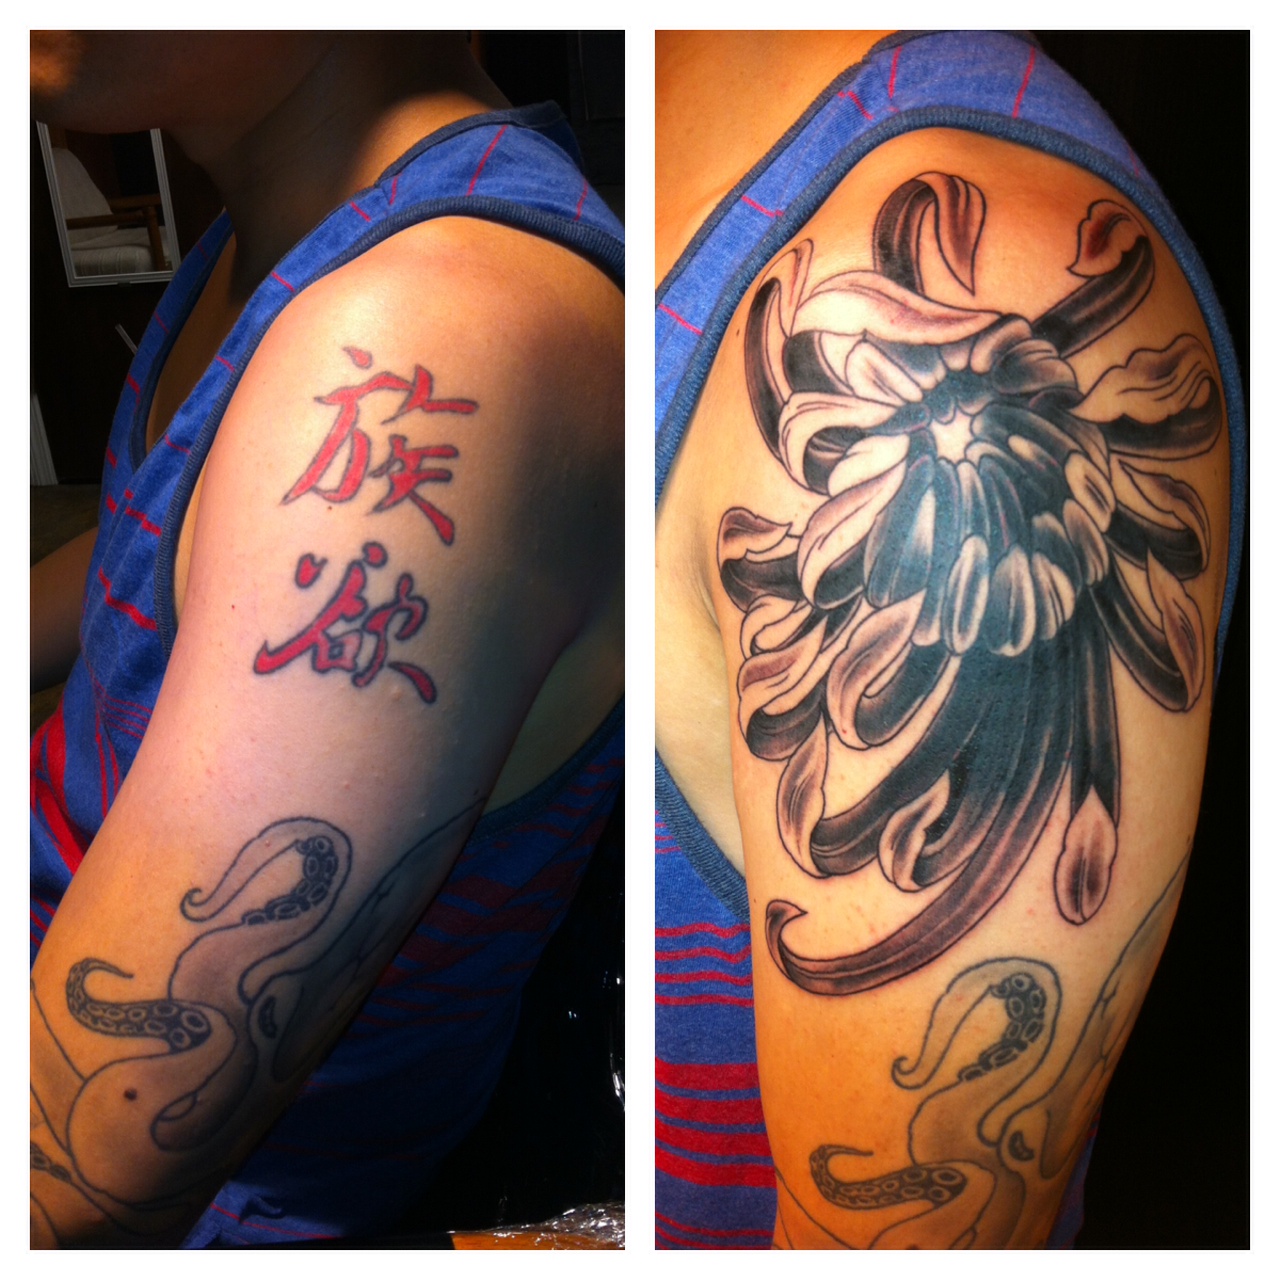 finishing up the day with black and grey another cover up